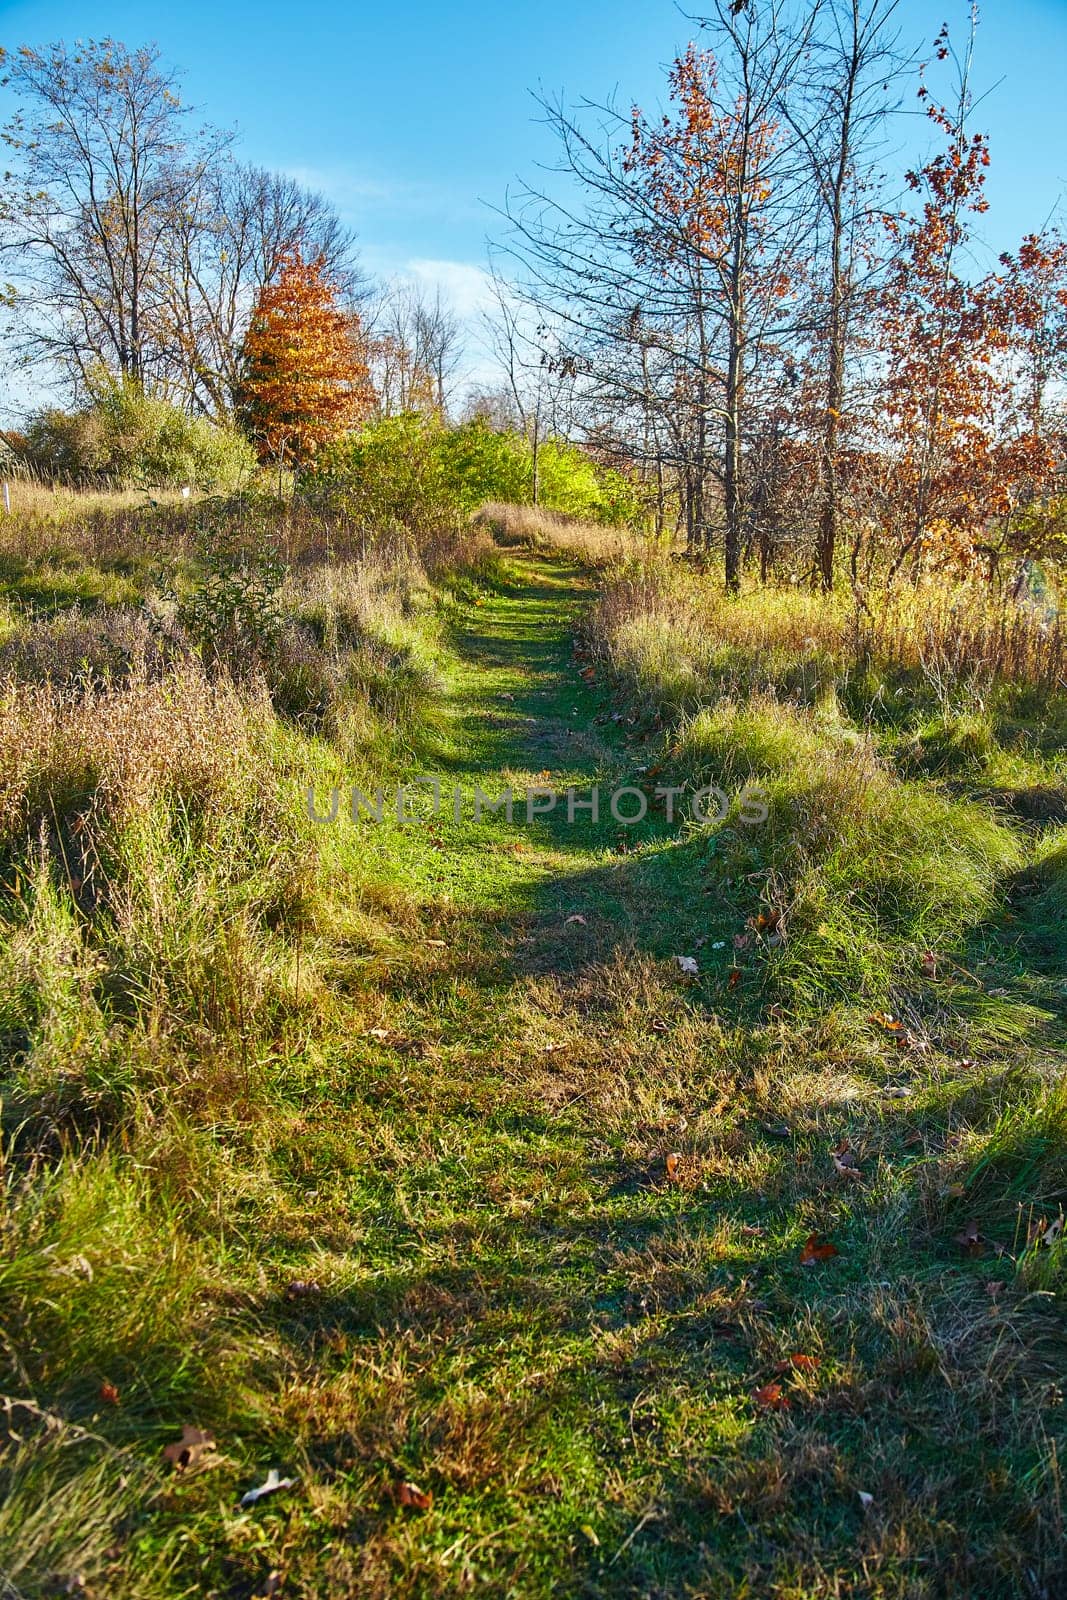 Golden Hour on Serene Autumn Trail in Bicentennial Acres, Indiana by njproductions